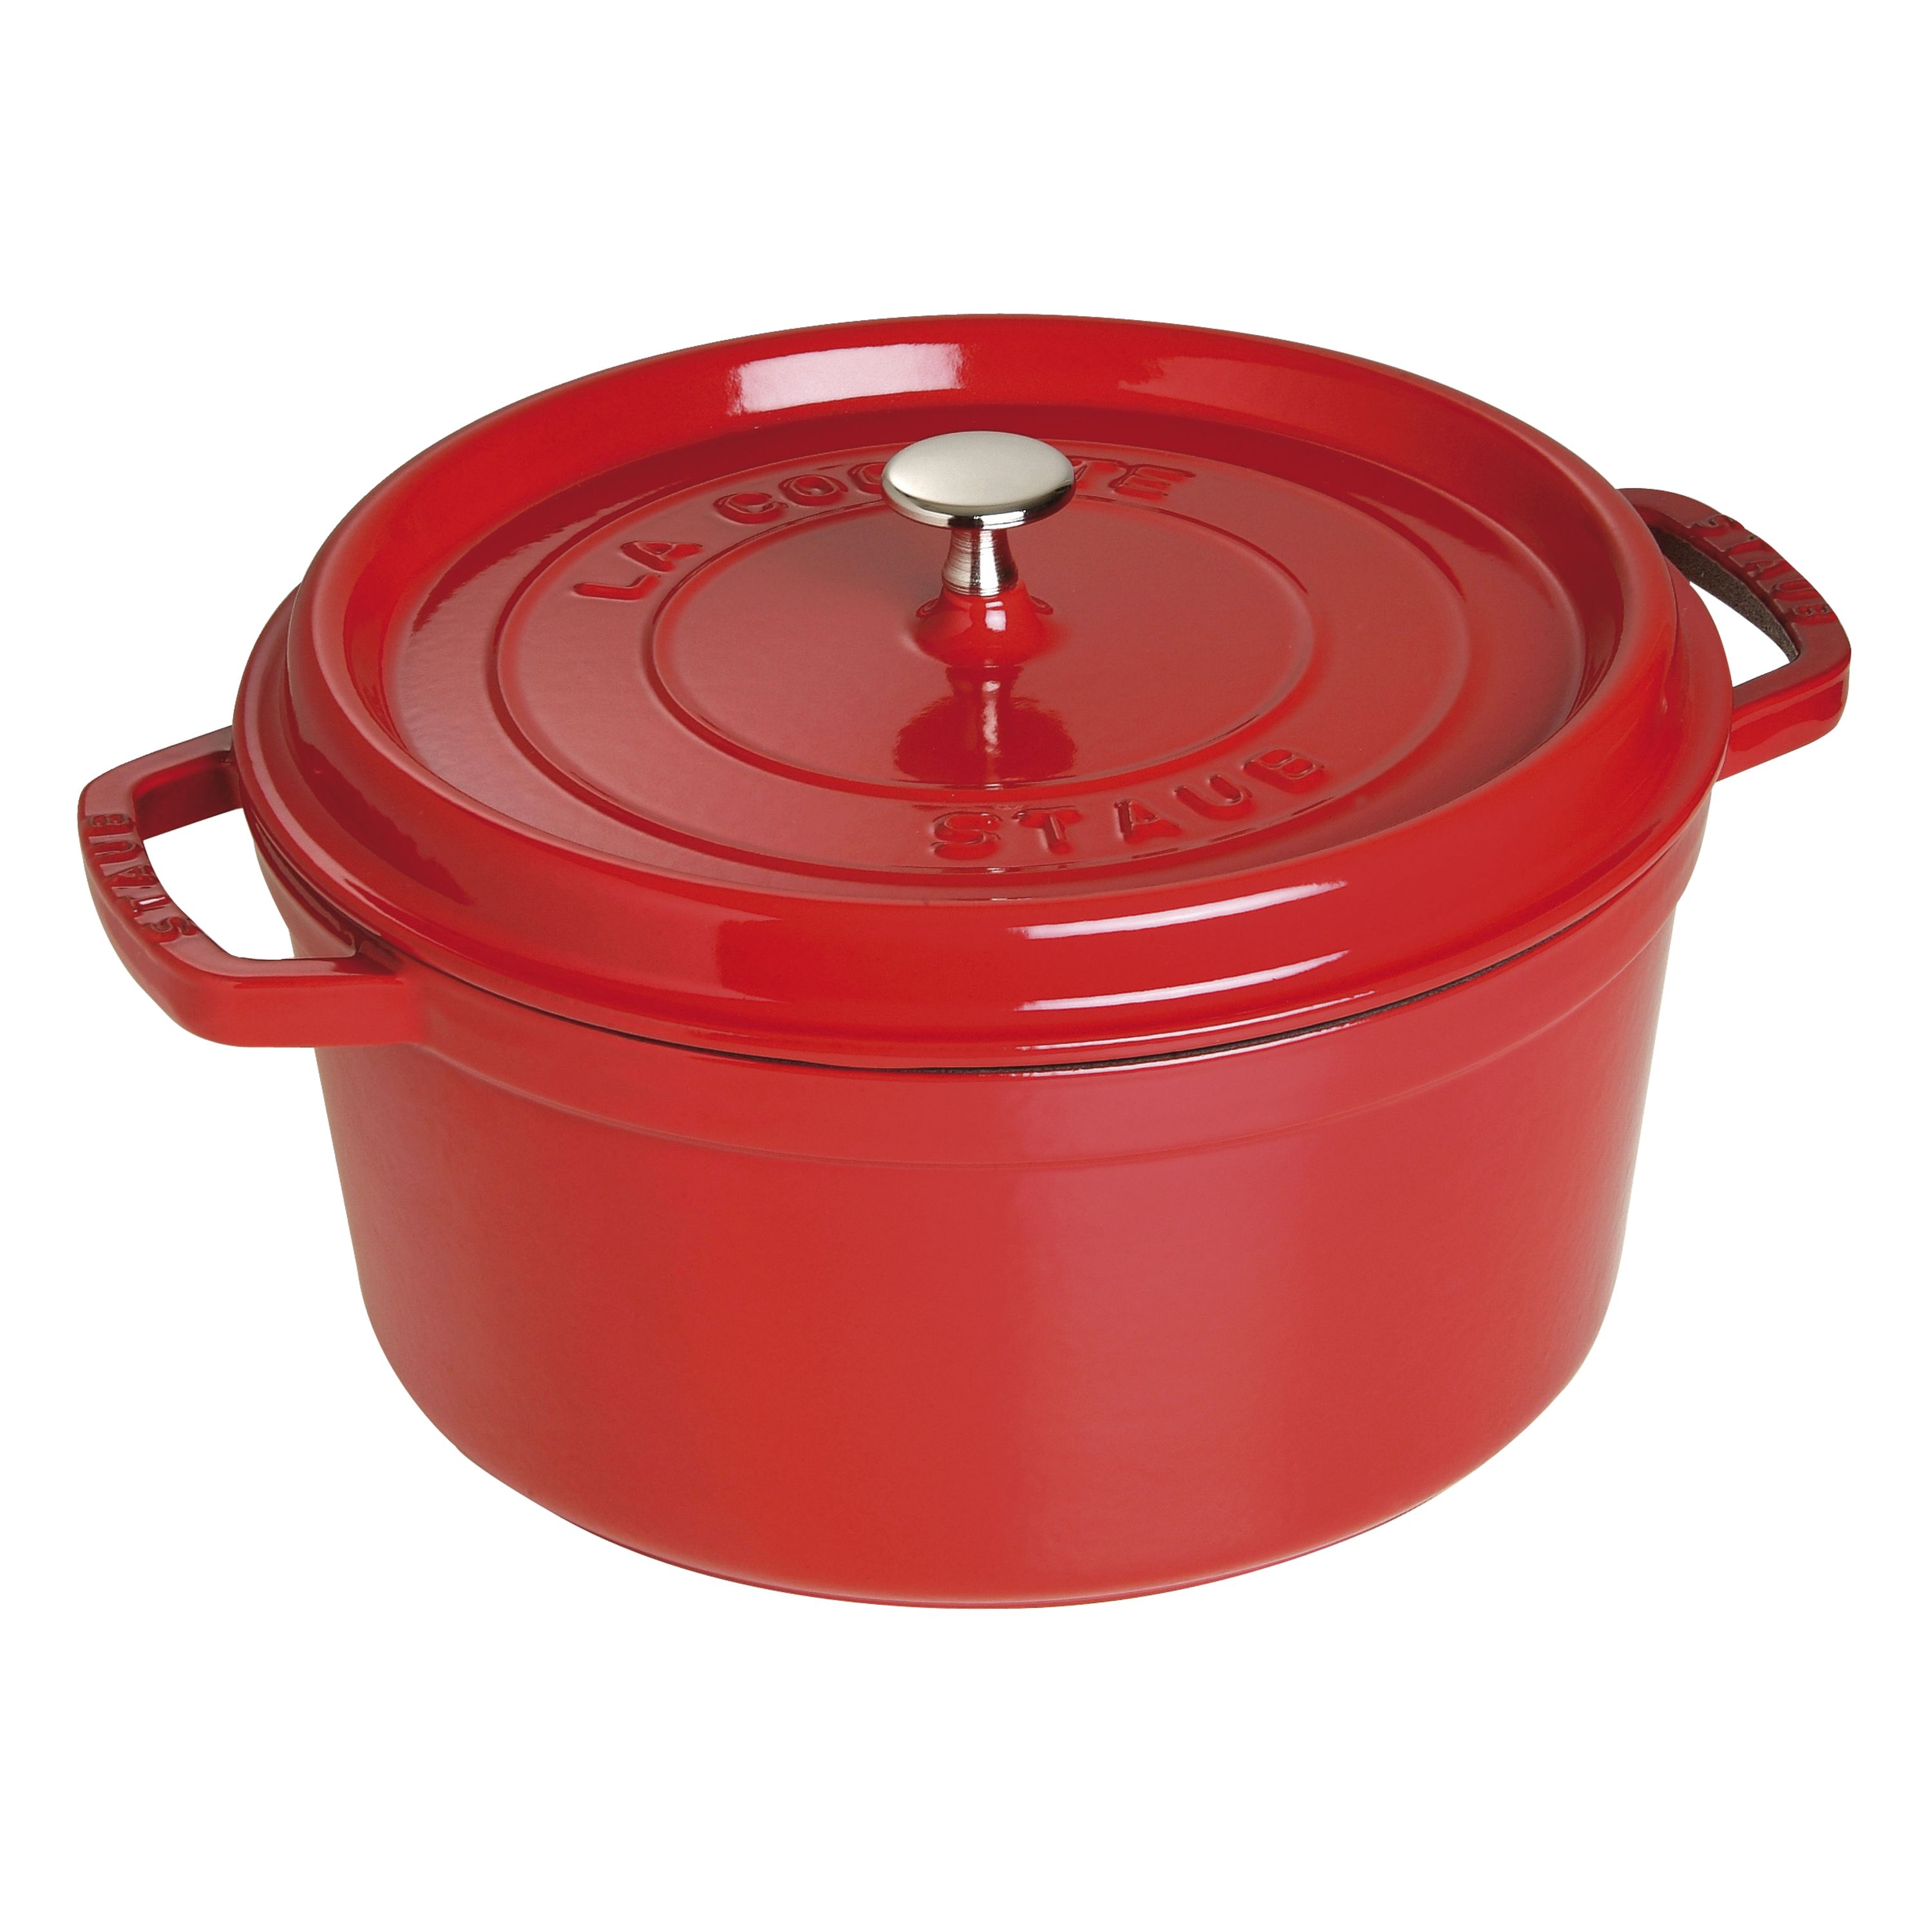 Red Enamel Dutch Oven 26 Cast Iron Made In France 5.5 Quarts Flame